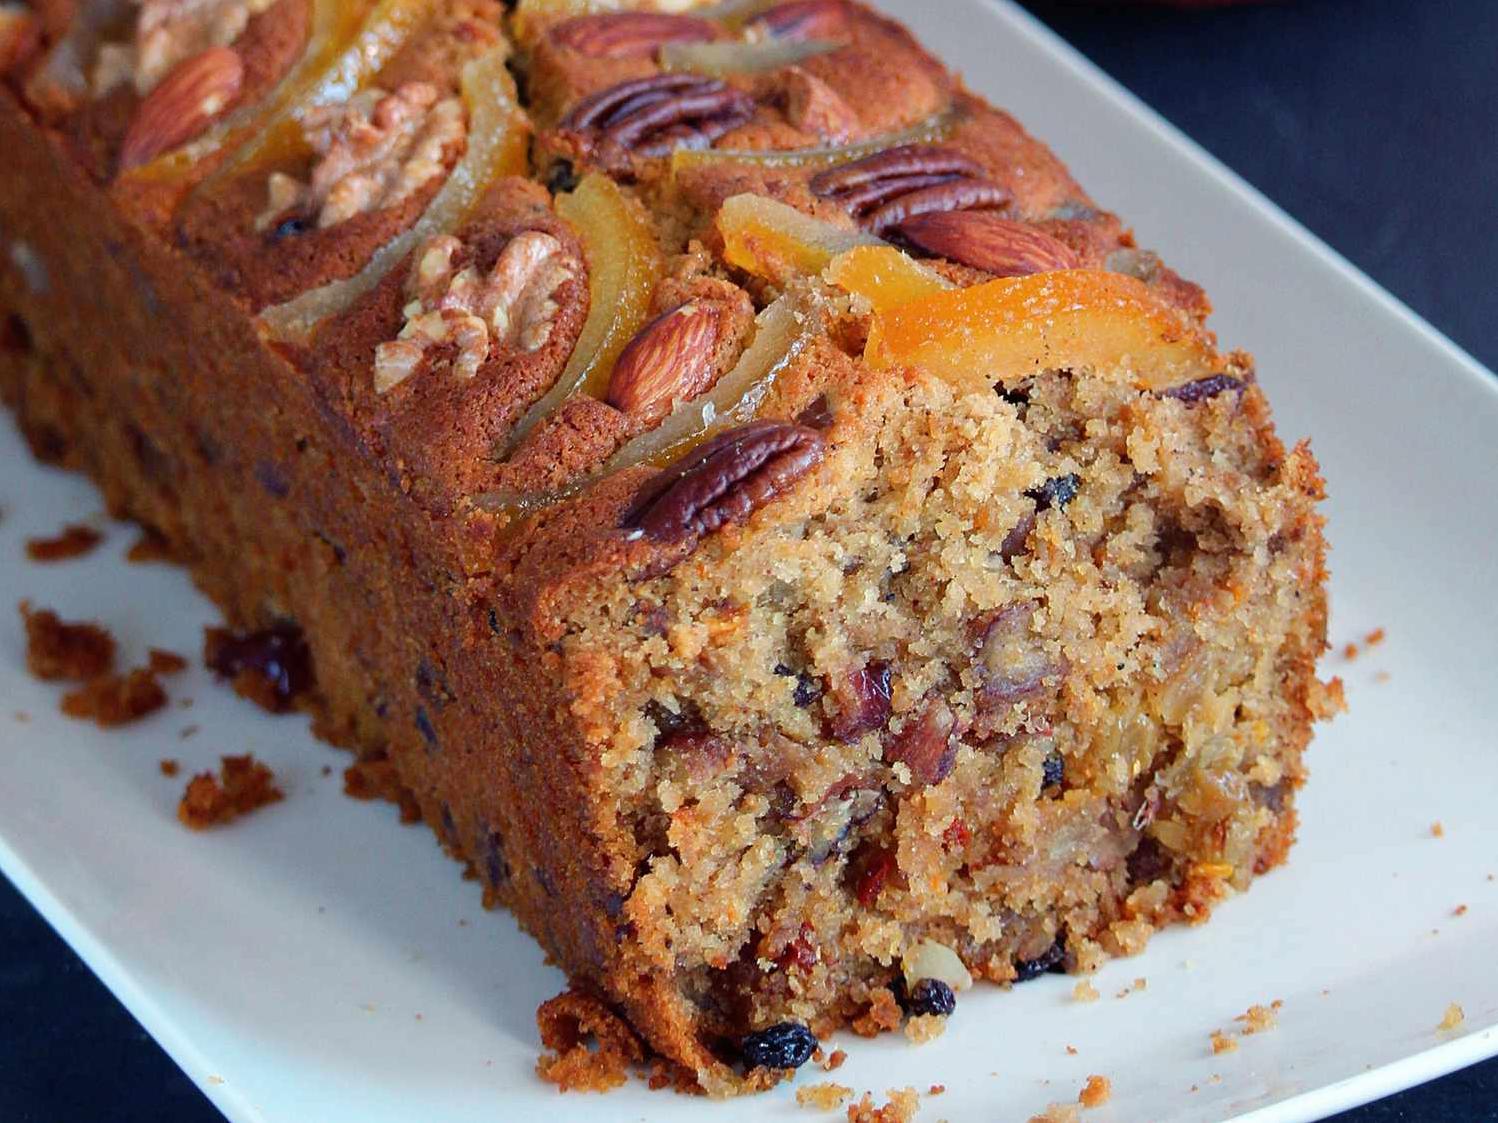  A slice of moist and delicious gluten-free fruitcake for a guilt-free indulgence